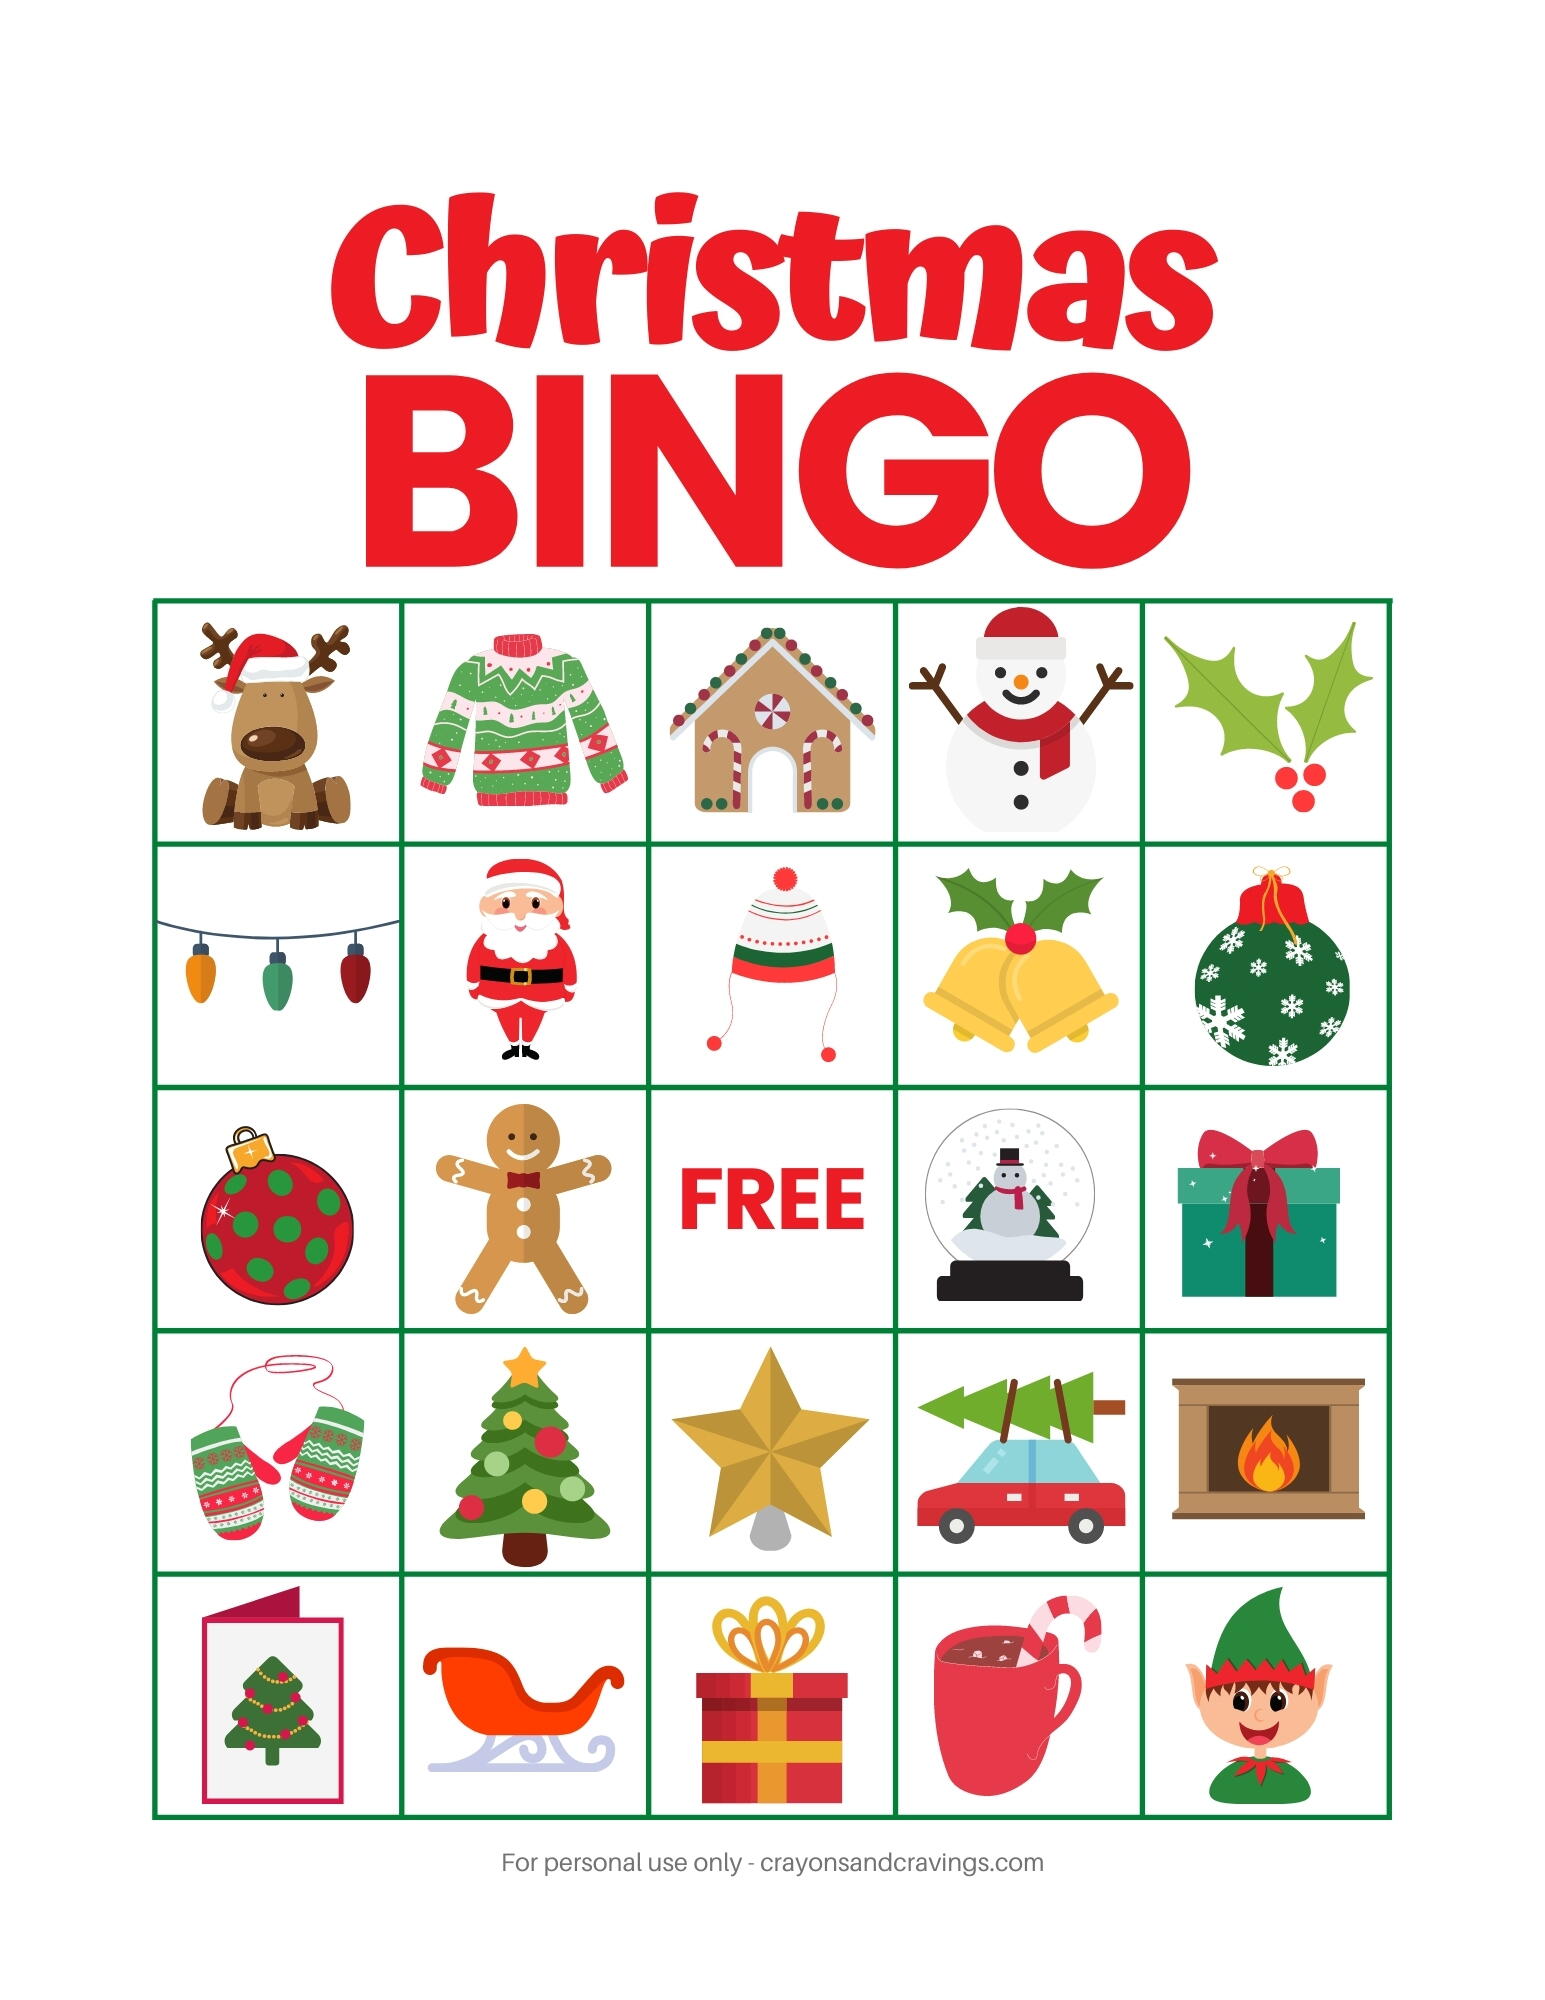 Games To Play With Bingo Cards